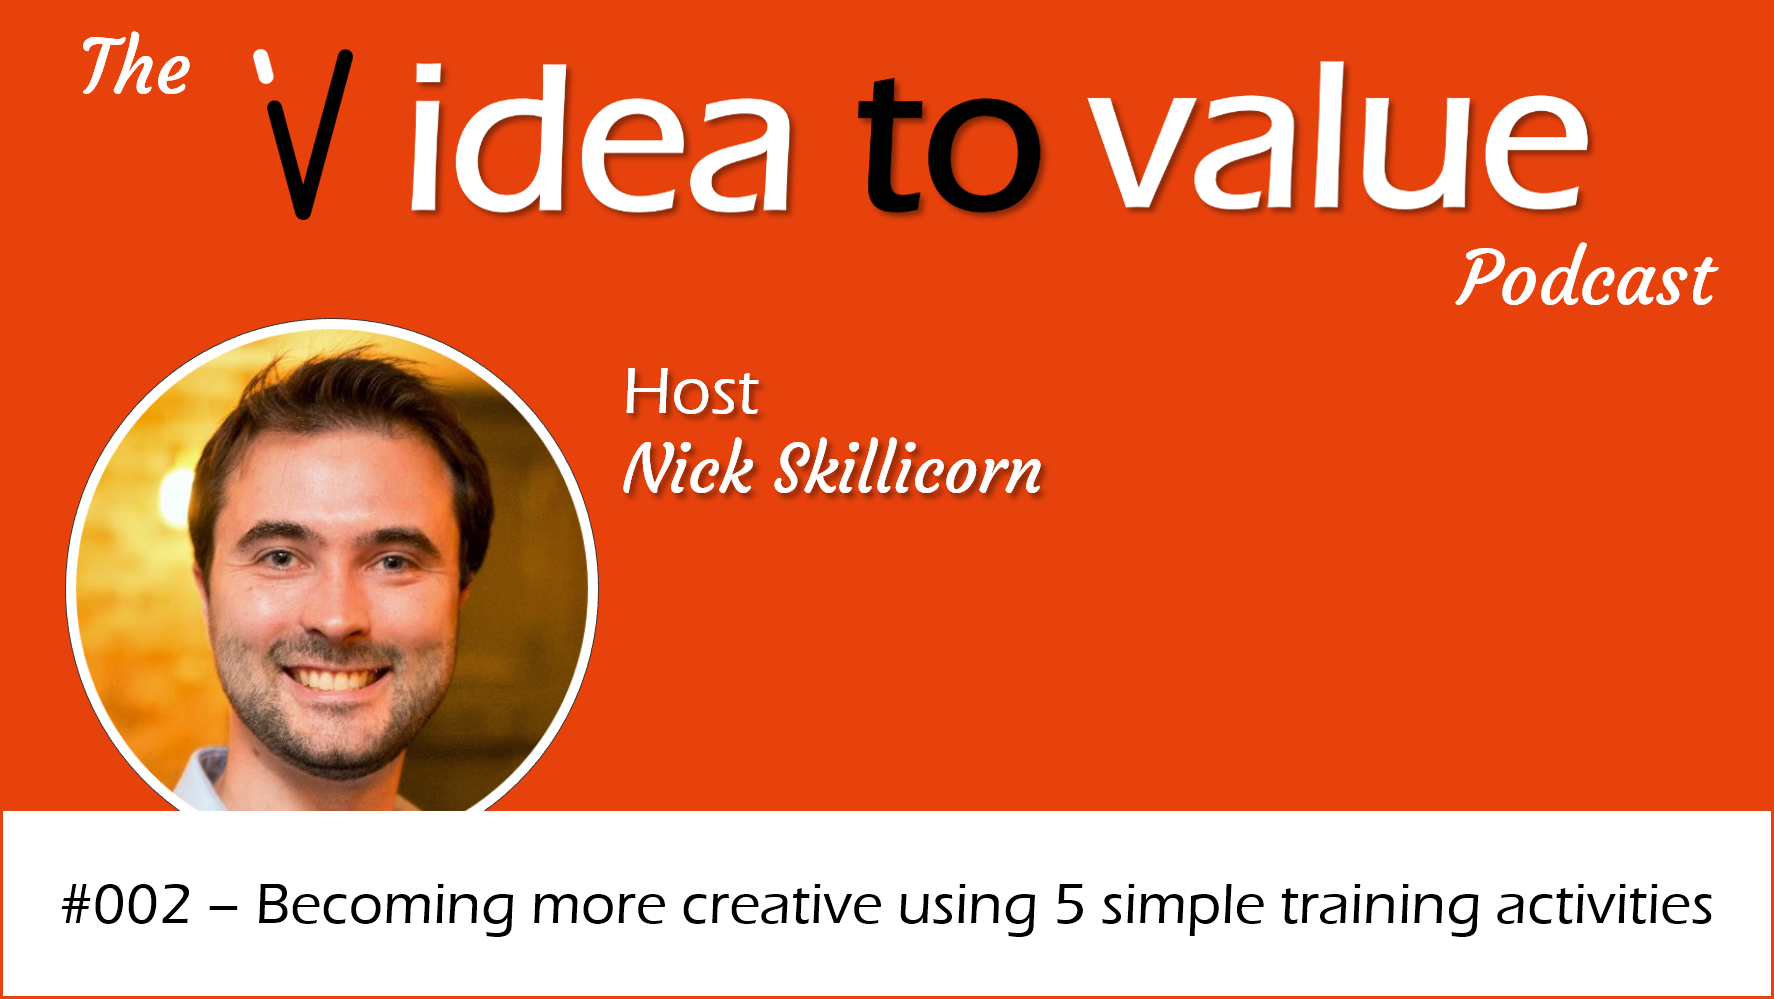 #002 – Becoming more creative using 5 simple training activities